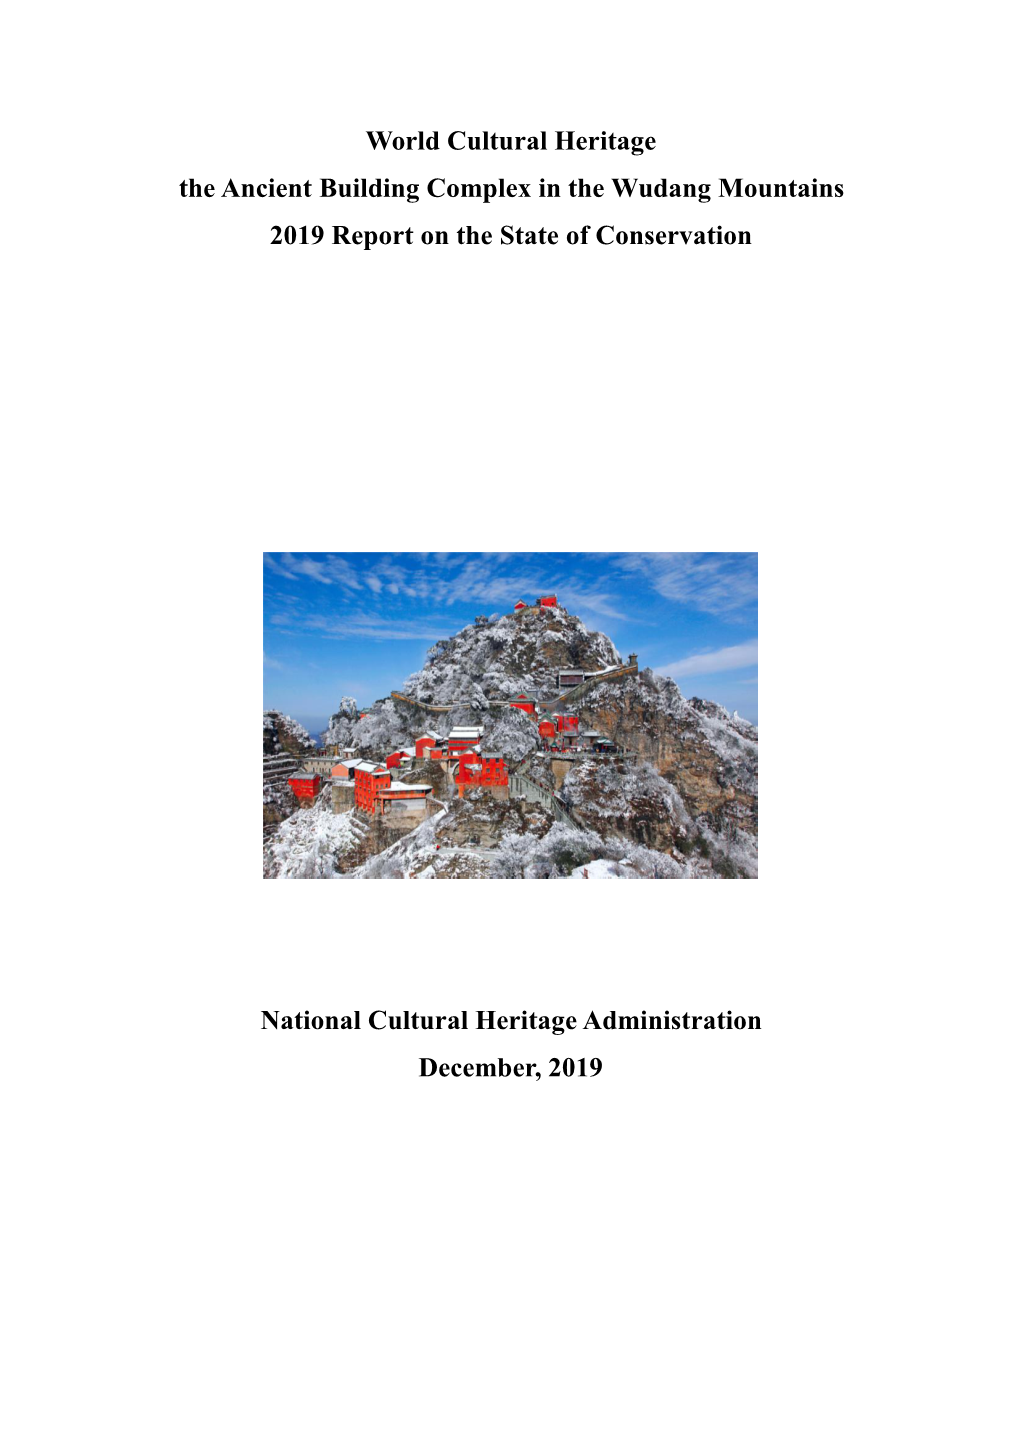 World Cultural Heritage the Ancient Building Complex in the Wudang Mountains 2019 Report on the State of Conservation